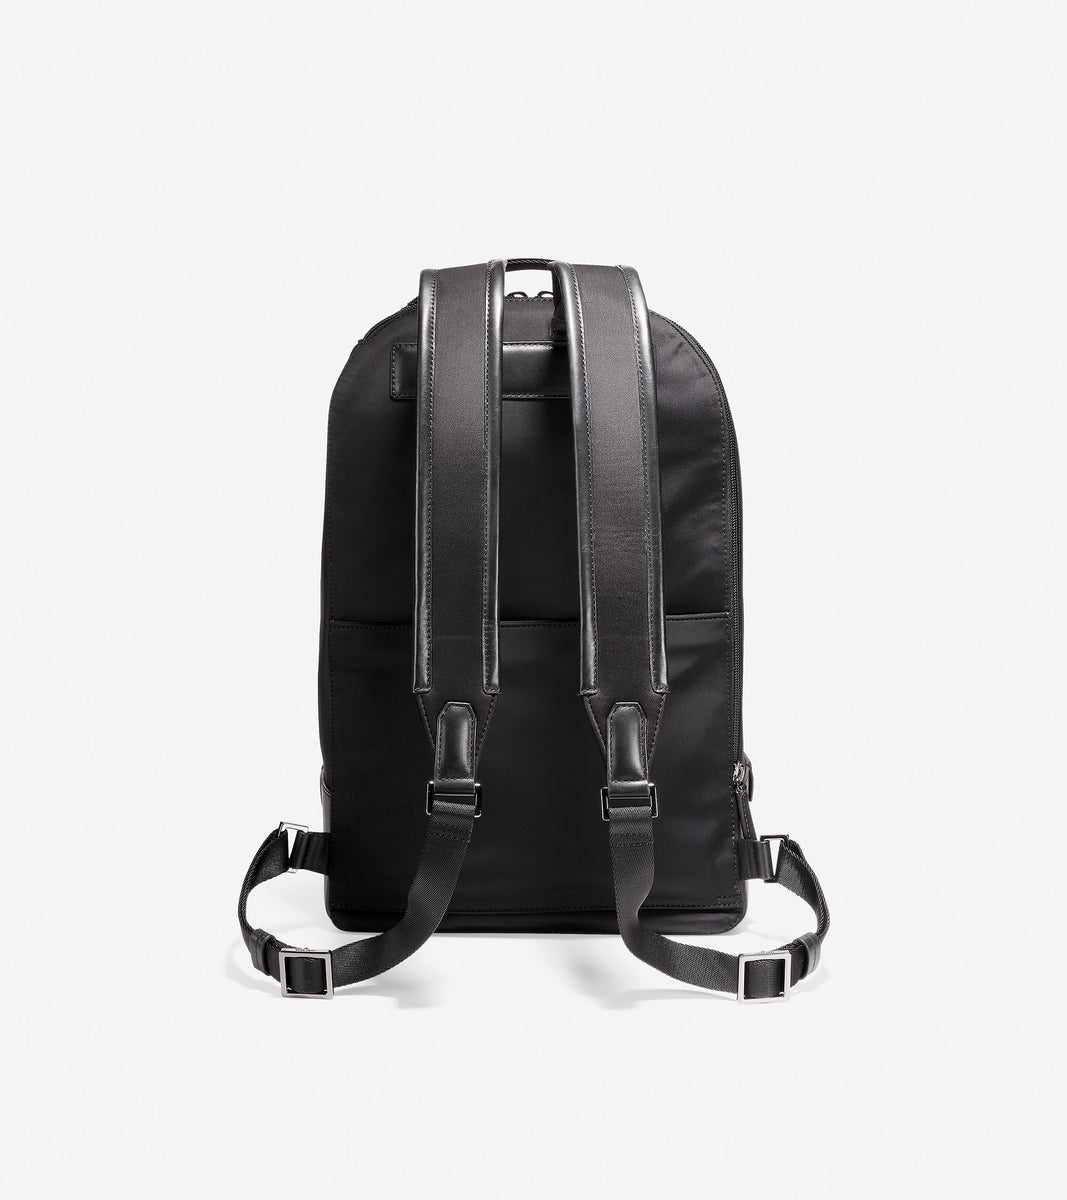 GRANDSERIES Nylon and Leather Backpack